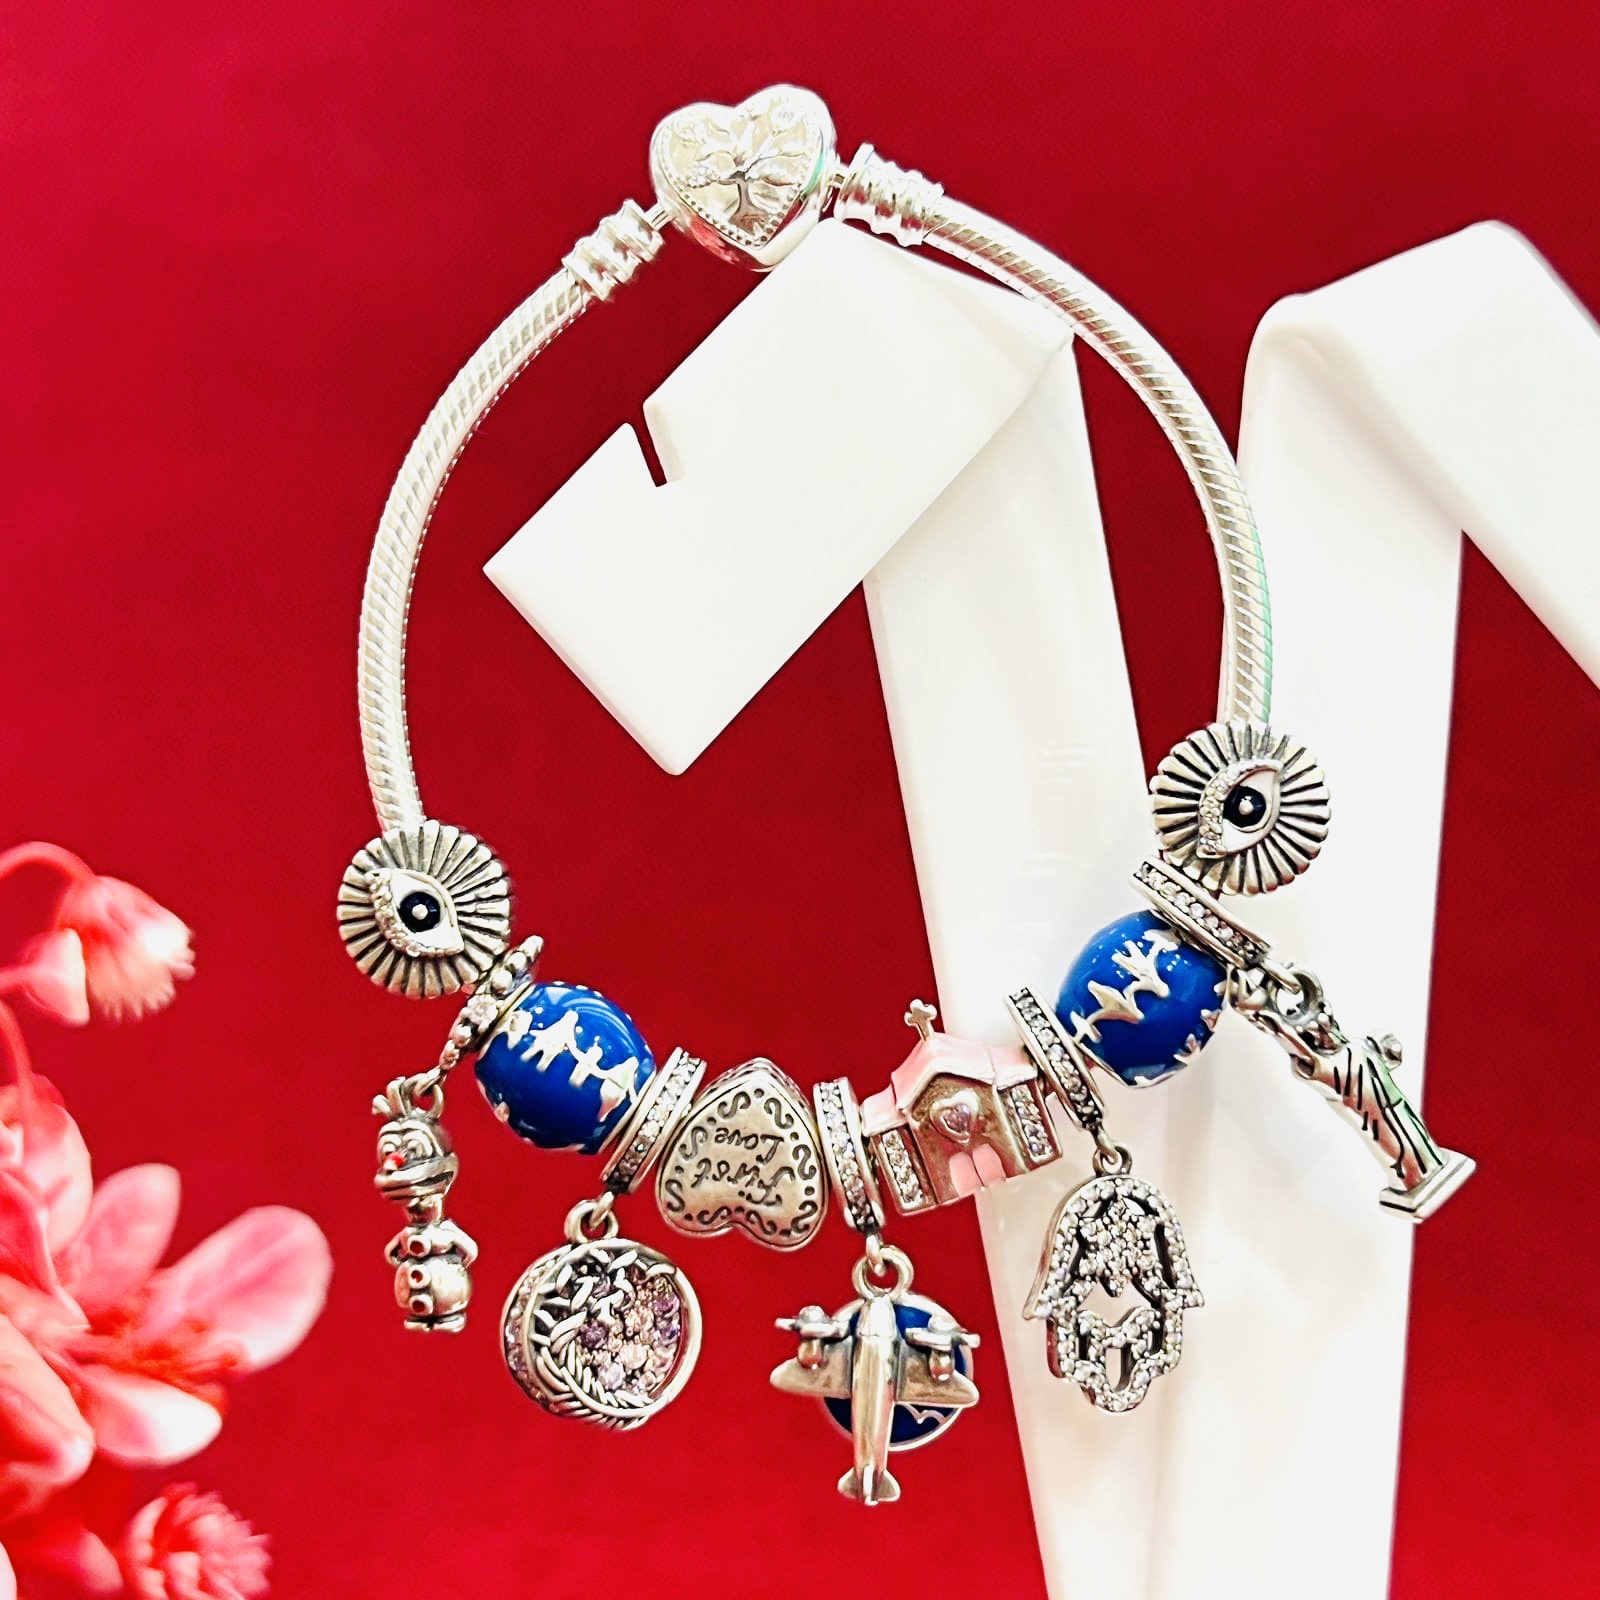 What is so special about Pandora bracelets?